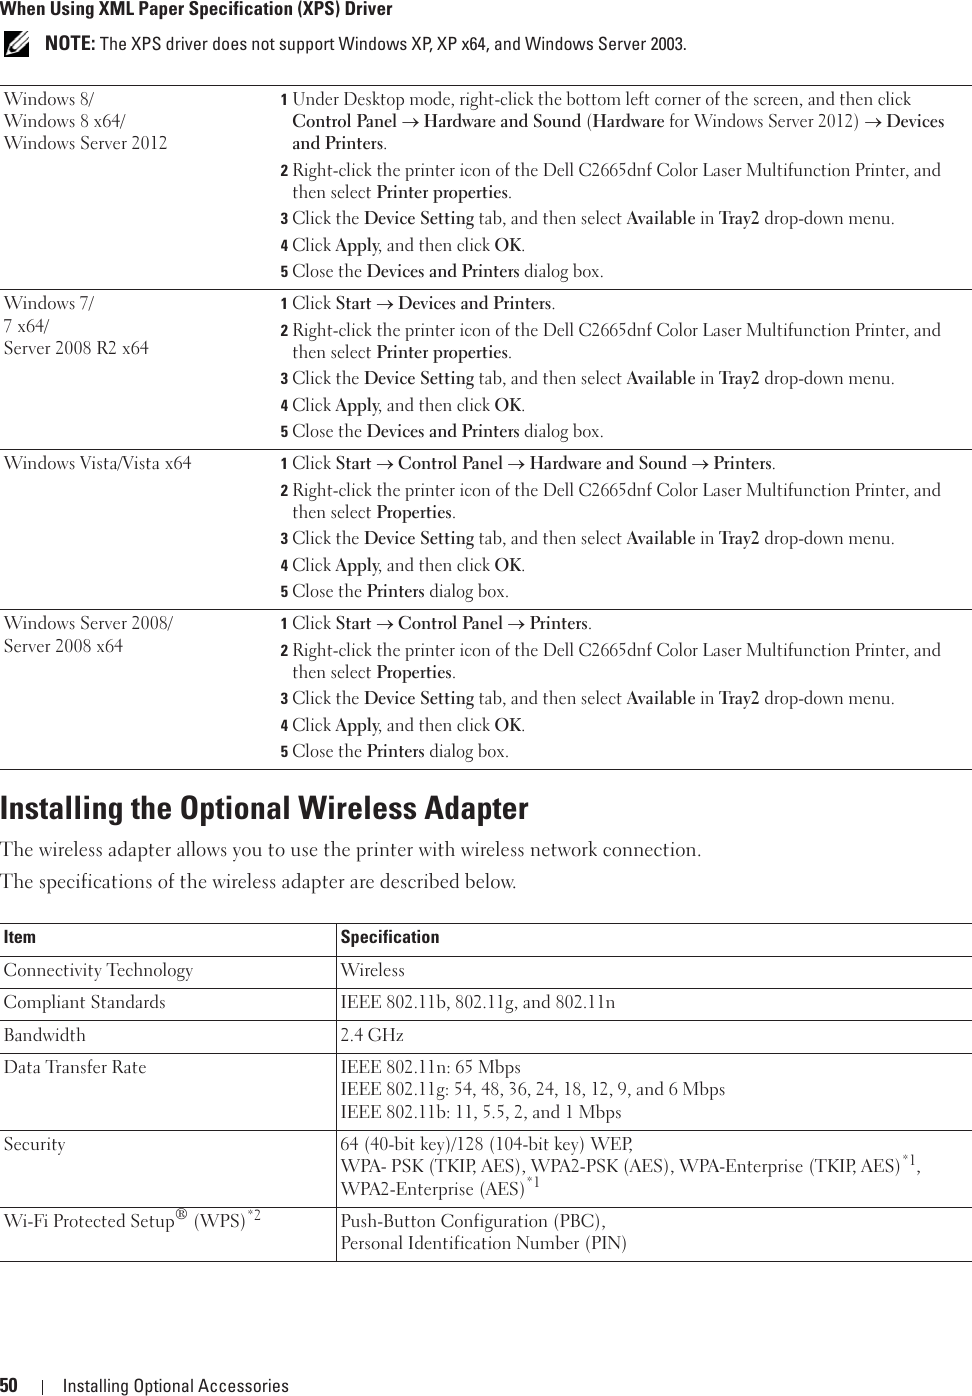 50 Installing Optional AccessoriesWhen Using XML Paper Specification (XPS) Driver NOTE: The XPS driver does not support Windows XP, XP x64, and Windows Server 2003. Installing the Optional Wireless AdapterThe wireless adapter allows you to use the printer with wireless network connection. The specifications of the wireless adapter are described below.Windows 8/Windows 8 x64/Windows Server 20121Under Desktop mode, right-click the bottom left corner of the screen, and then click Control Panel o Hardware and Sound (Hardware for Windows Server 2012) o Devices and Printers.2Right-click the printer icon of the Dell C2665dnf Color Laser Multifunction Printer, and then select Printer properties.3Click the Device Setting tab, and then select Available in Tray2 drop-down menu.4Click Apply, and then click OK.5Close the Devices and Printers dialog box.Windows 7/7 x64/Server 2008 R2 x641Click Start o Devices and Printers.2Right-click the printer icon of the Dell C2665dnf Color Laser Multifunction Printer, and then select Printer properties.3Click the Device Setting tab, and then select Available in Tray2 drop-down menu.4Click Apply, and then click OK.5Close the Devices and Printers dialog box.Windows Vista/Vista x64 1Click Start o Control Panel o Hardware and Sound o Printers.2Right-click the printer icon of the Dell C2665dnf Color Laser Multifunction Printer, and then select Properties.3Click the Device Setting tab, and then select Available in Tray2 drop-down menu.4Click Apply, and then click OK.5Close the Printers dialog box.Windows Server 2008/Server 2008 x641Click Start o Control Panel o Printers.2Right-click the printer icon of the Dell C2665dnf Color Laser Multifunction Printer, and then select Properties.3Click the Device Setting tab, and then select Available in Tray2 drop-down menu.4Click Apply, and then click OK.5Close the Printers dialog box.Item SpecificationConnectivity Technology WirelessCompliant Standards IEEE 802.11b, 802.11g, and 802.11nBandwidth 2.4 GHzData Transfer Rate IEEE 802.11n: 65 MbpsIEEE 802.11g: 54, 48, 36, 24, 18, 12, 9, and 6 MbpsIEEE 802.11b: 11, 5.5, 2, and 1 MbpsSecurity 64 (40-bit key)/128 (104-bit key) WEP, WPA- PSK (TKIP, AES), WPA2-PSK (AES), WPA-Enterprise (TKIP, AES)*1, WPA2-Enterprise (AES)*1Wi-Fi Protected Setup® (WPS)*2 Push-Button Configuration (PBC), Personal Identification Number (PIN)